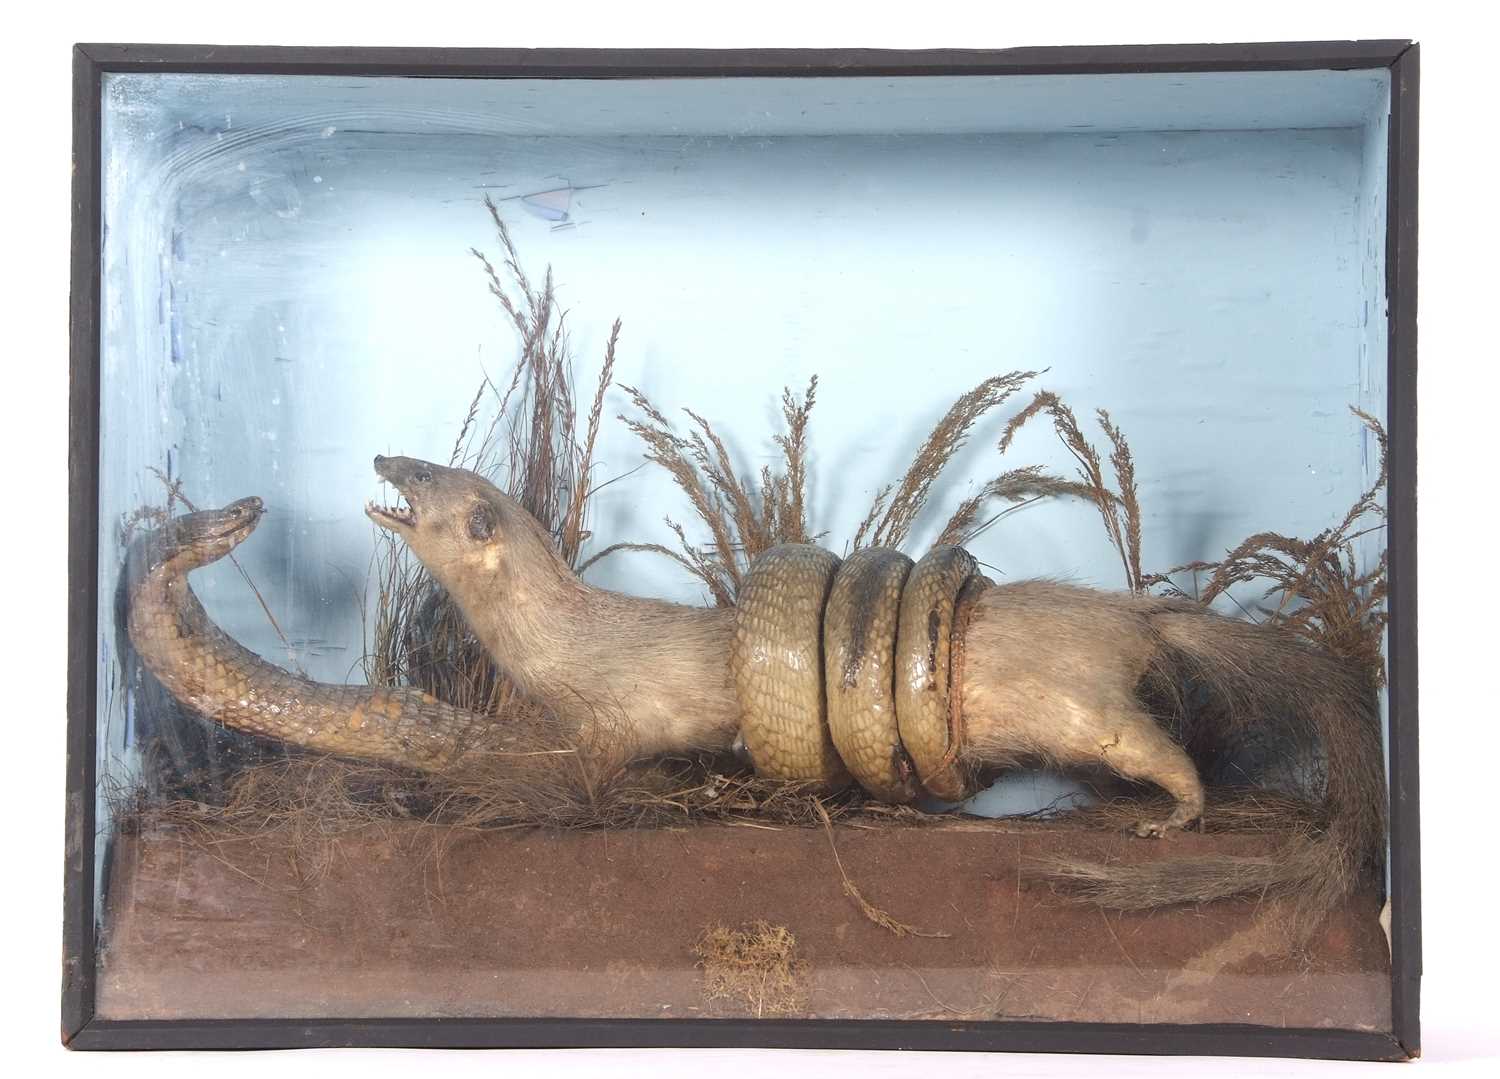 Late victorian / Early Edwardian Taxidermy cased Mongoose fighting a Cobra set in naturalistic